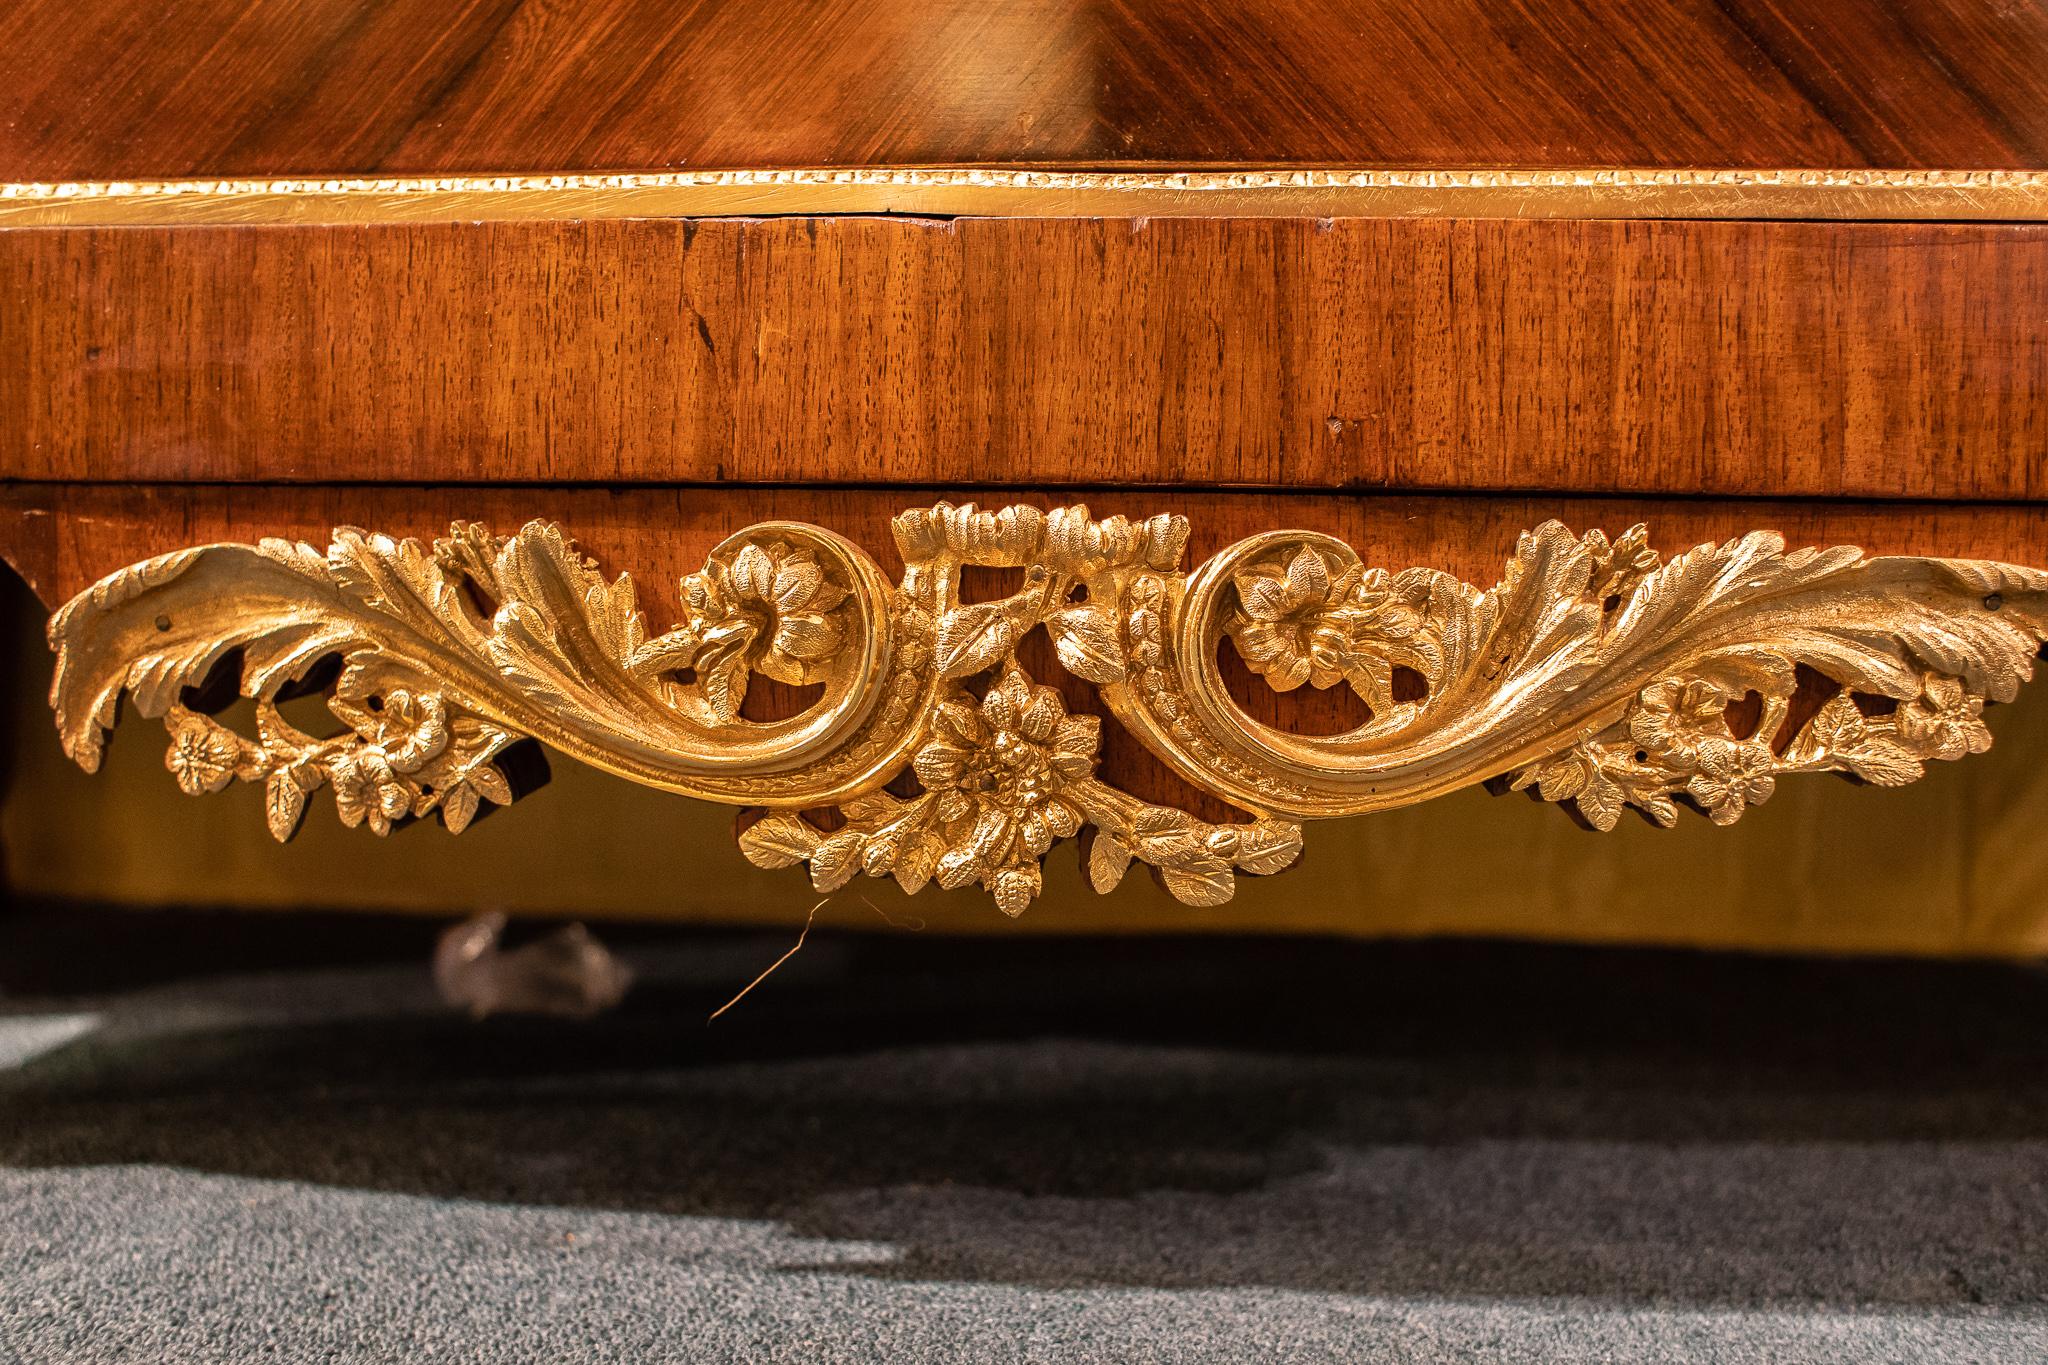 Late 19th Century French Louis XVI Style Marquetry Inlaid Bronze-Mounted Marble-Top Commode For Sale